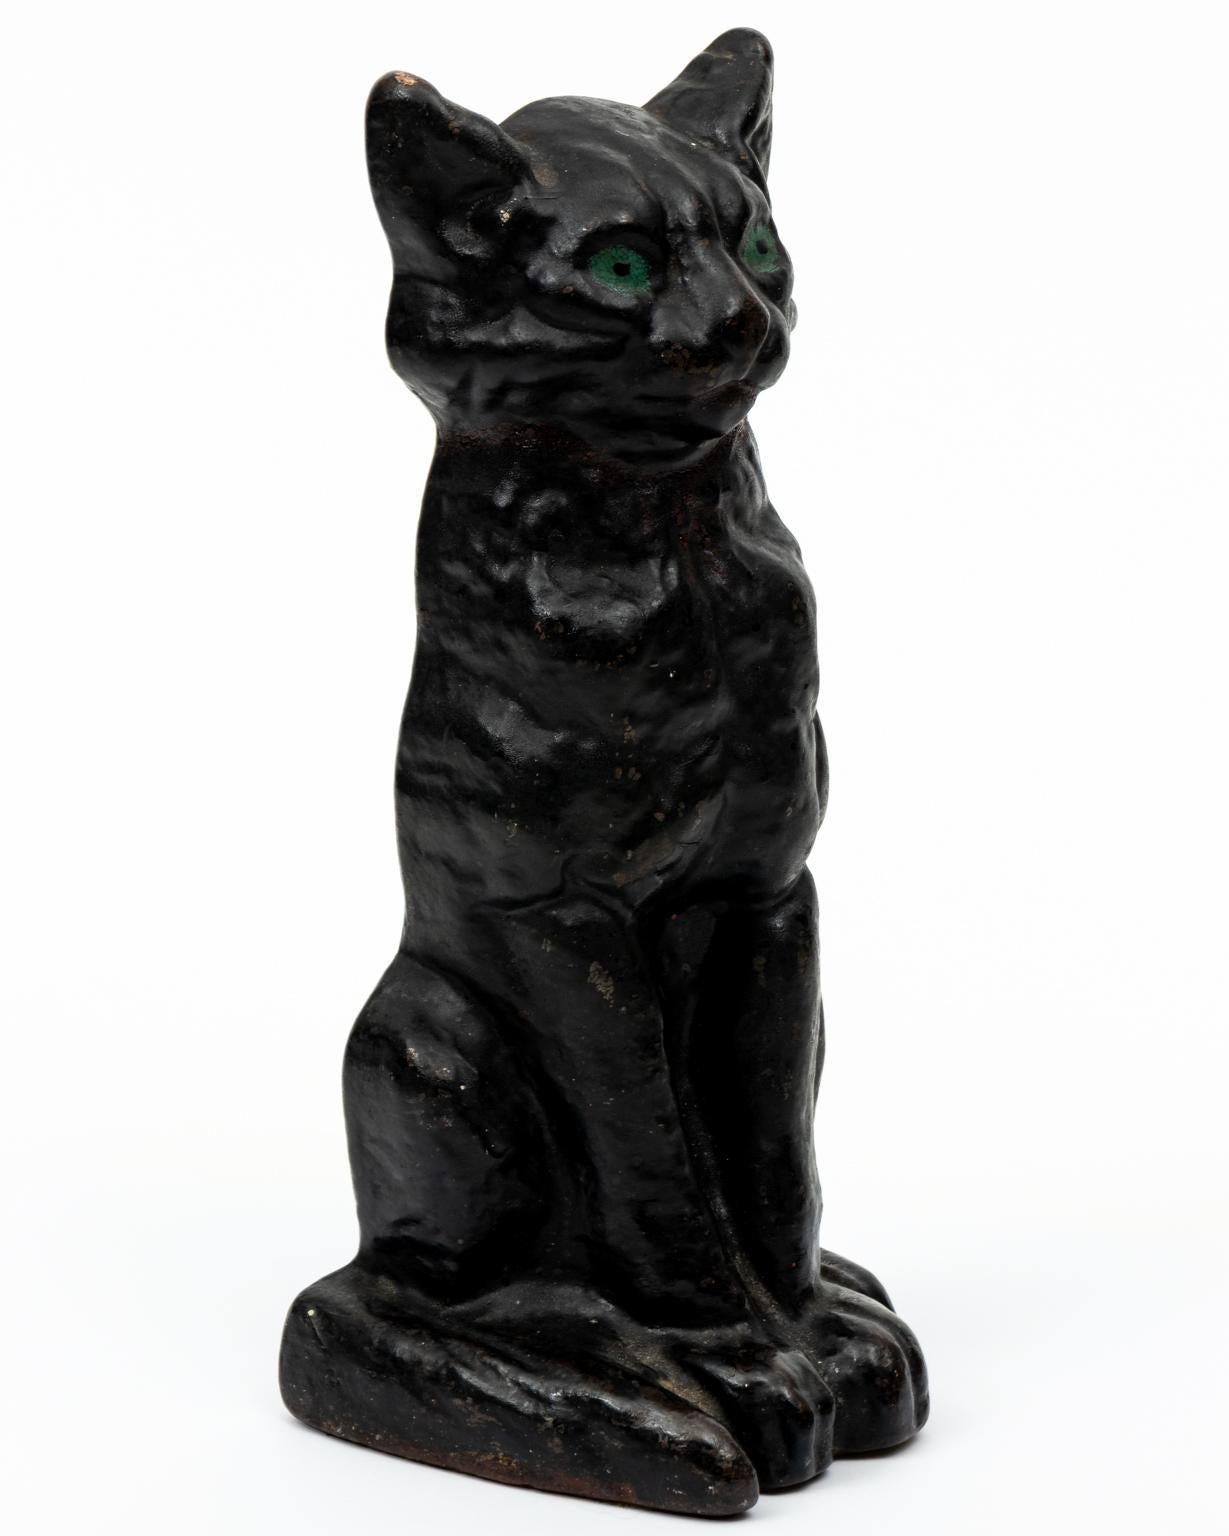 Circa 1920s National Foundry cast iron black cat doorstop with painted green eyes. The piece is heavy and weighs 6 pounds 7 ounces. Made in the United States. Please note of wear consistent with age including wear to paint, which is expected